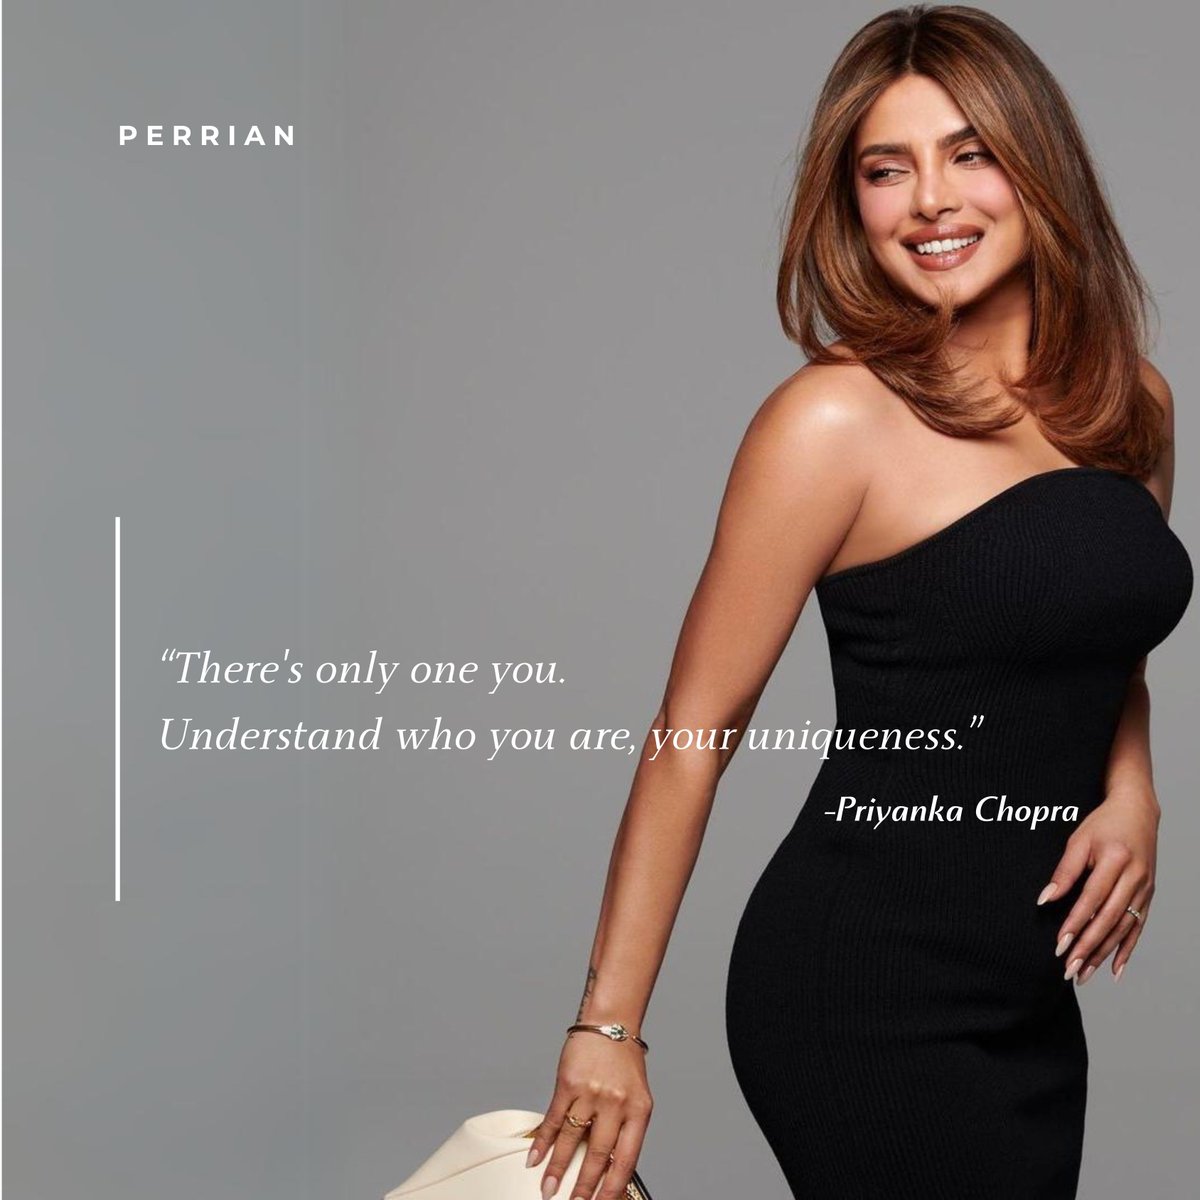 @priyankachopra defines what it means to be a confident, empowered woman. perrian.com #PriyankaChopra #confidence #her